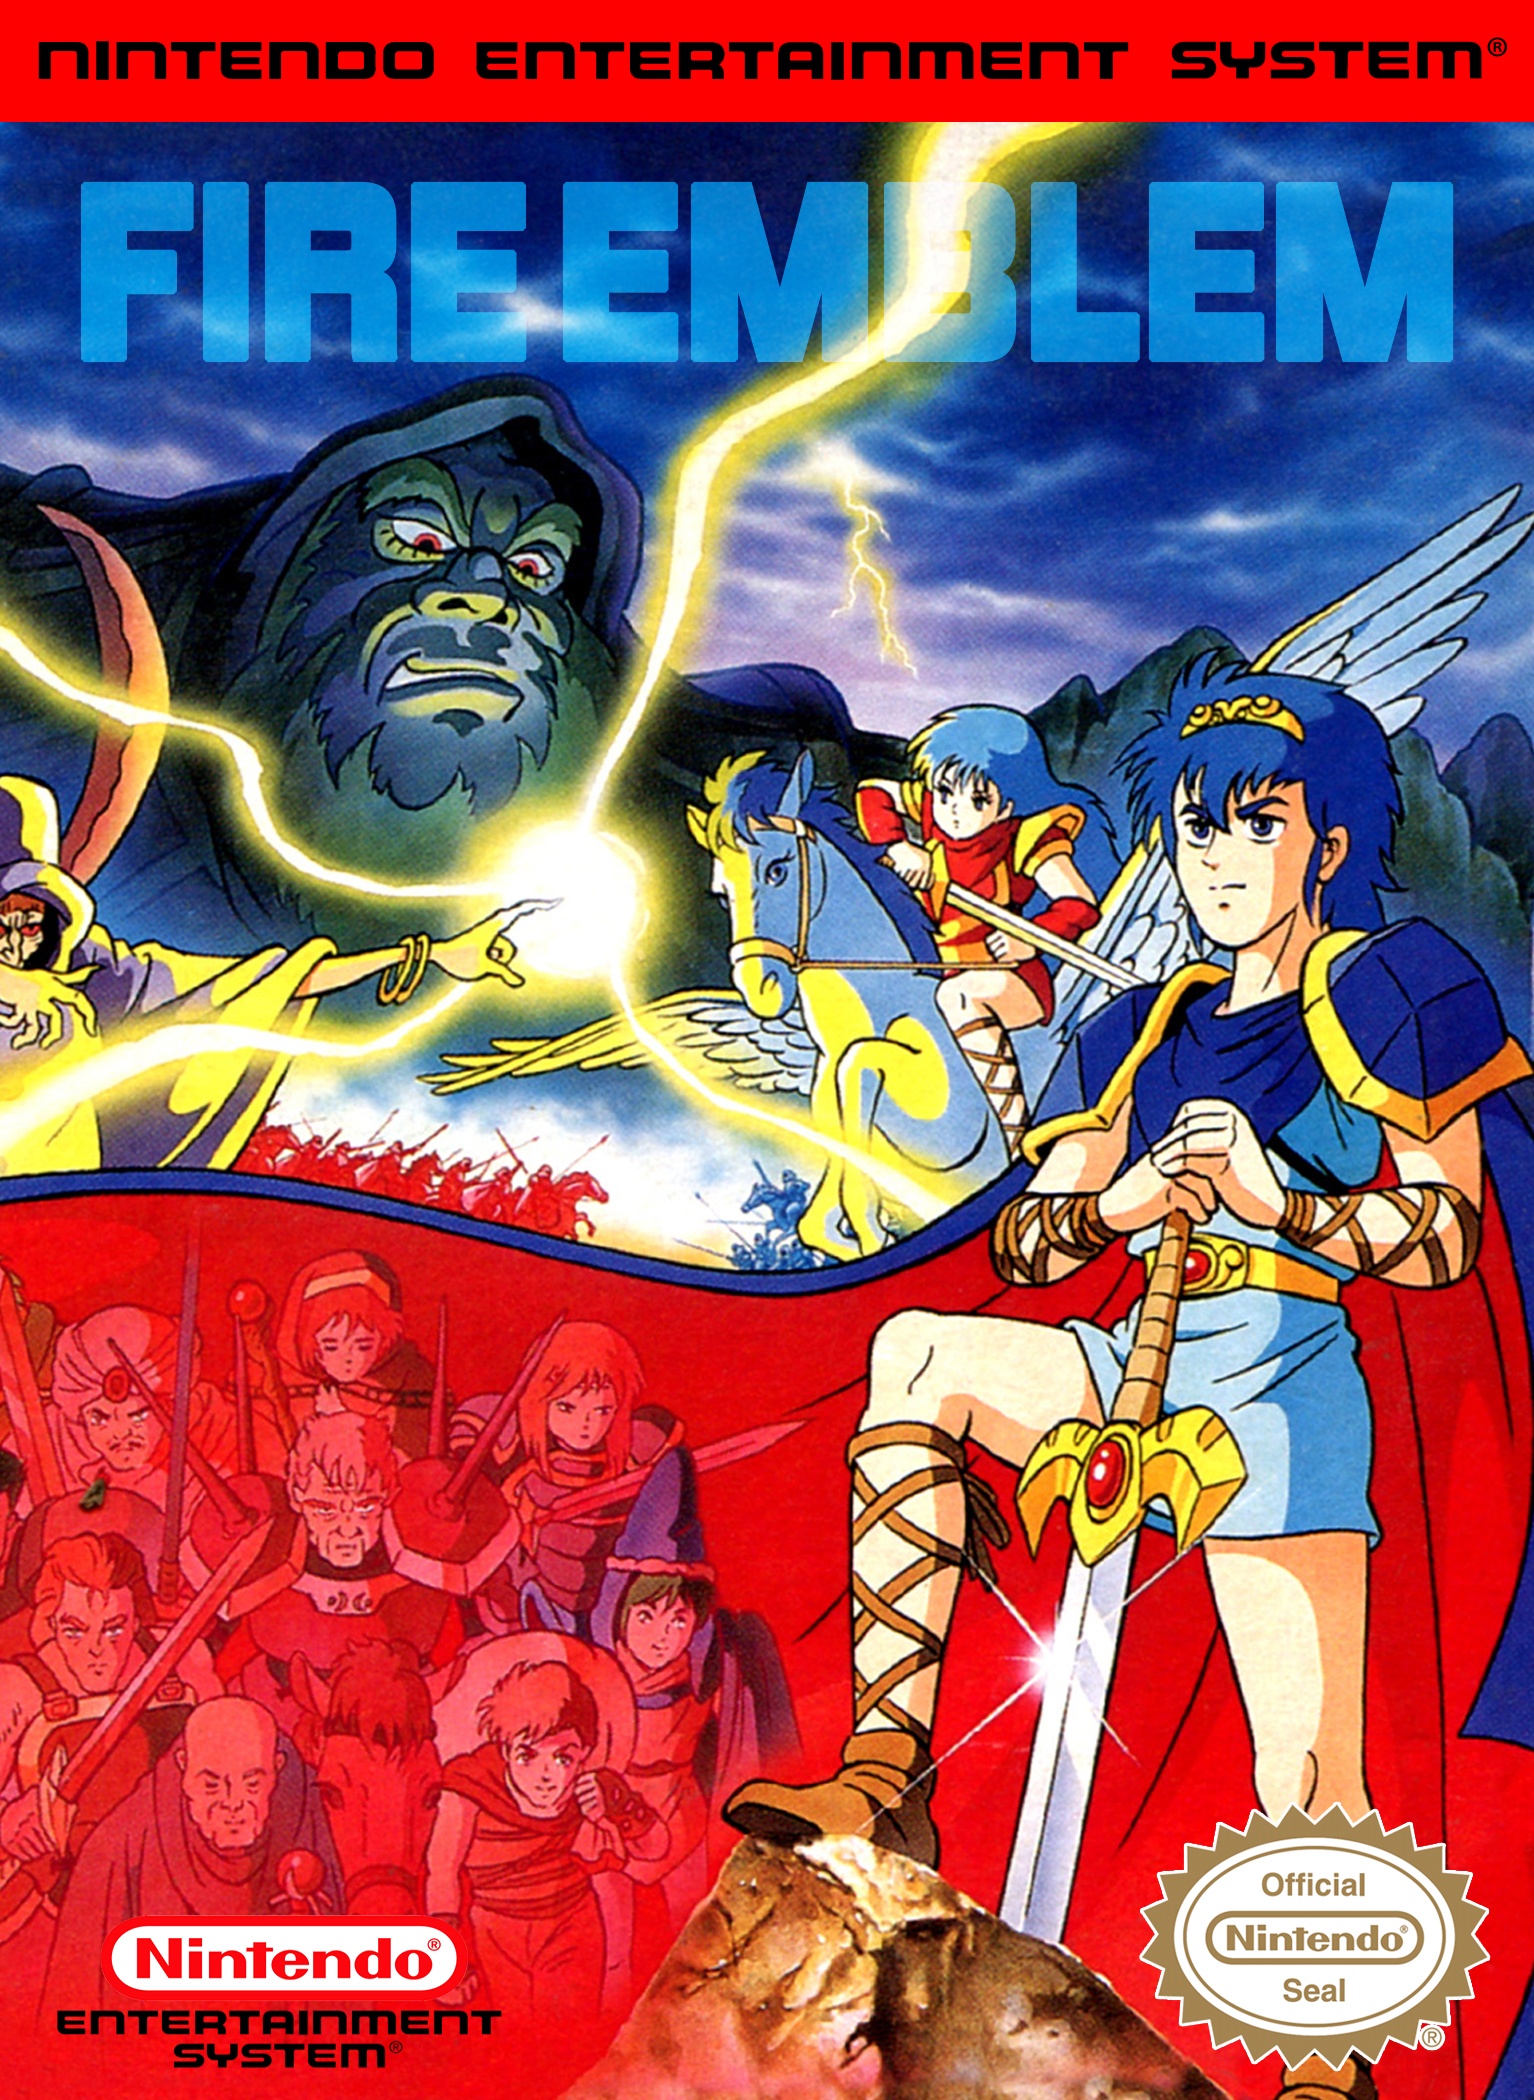 Fire Emblem: Shadow Dragons and the Blade of Light box cover